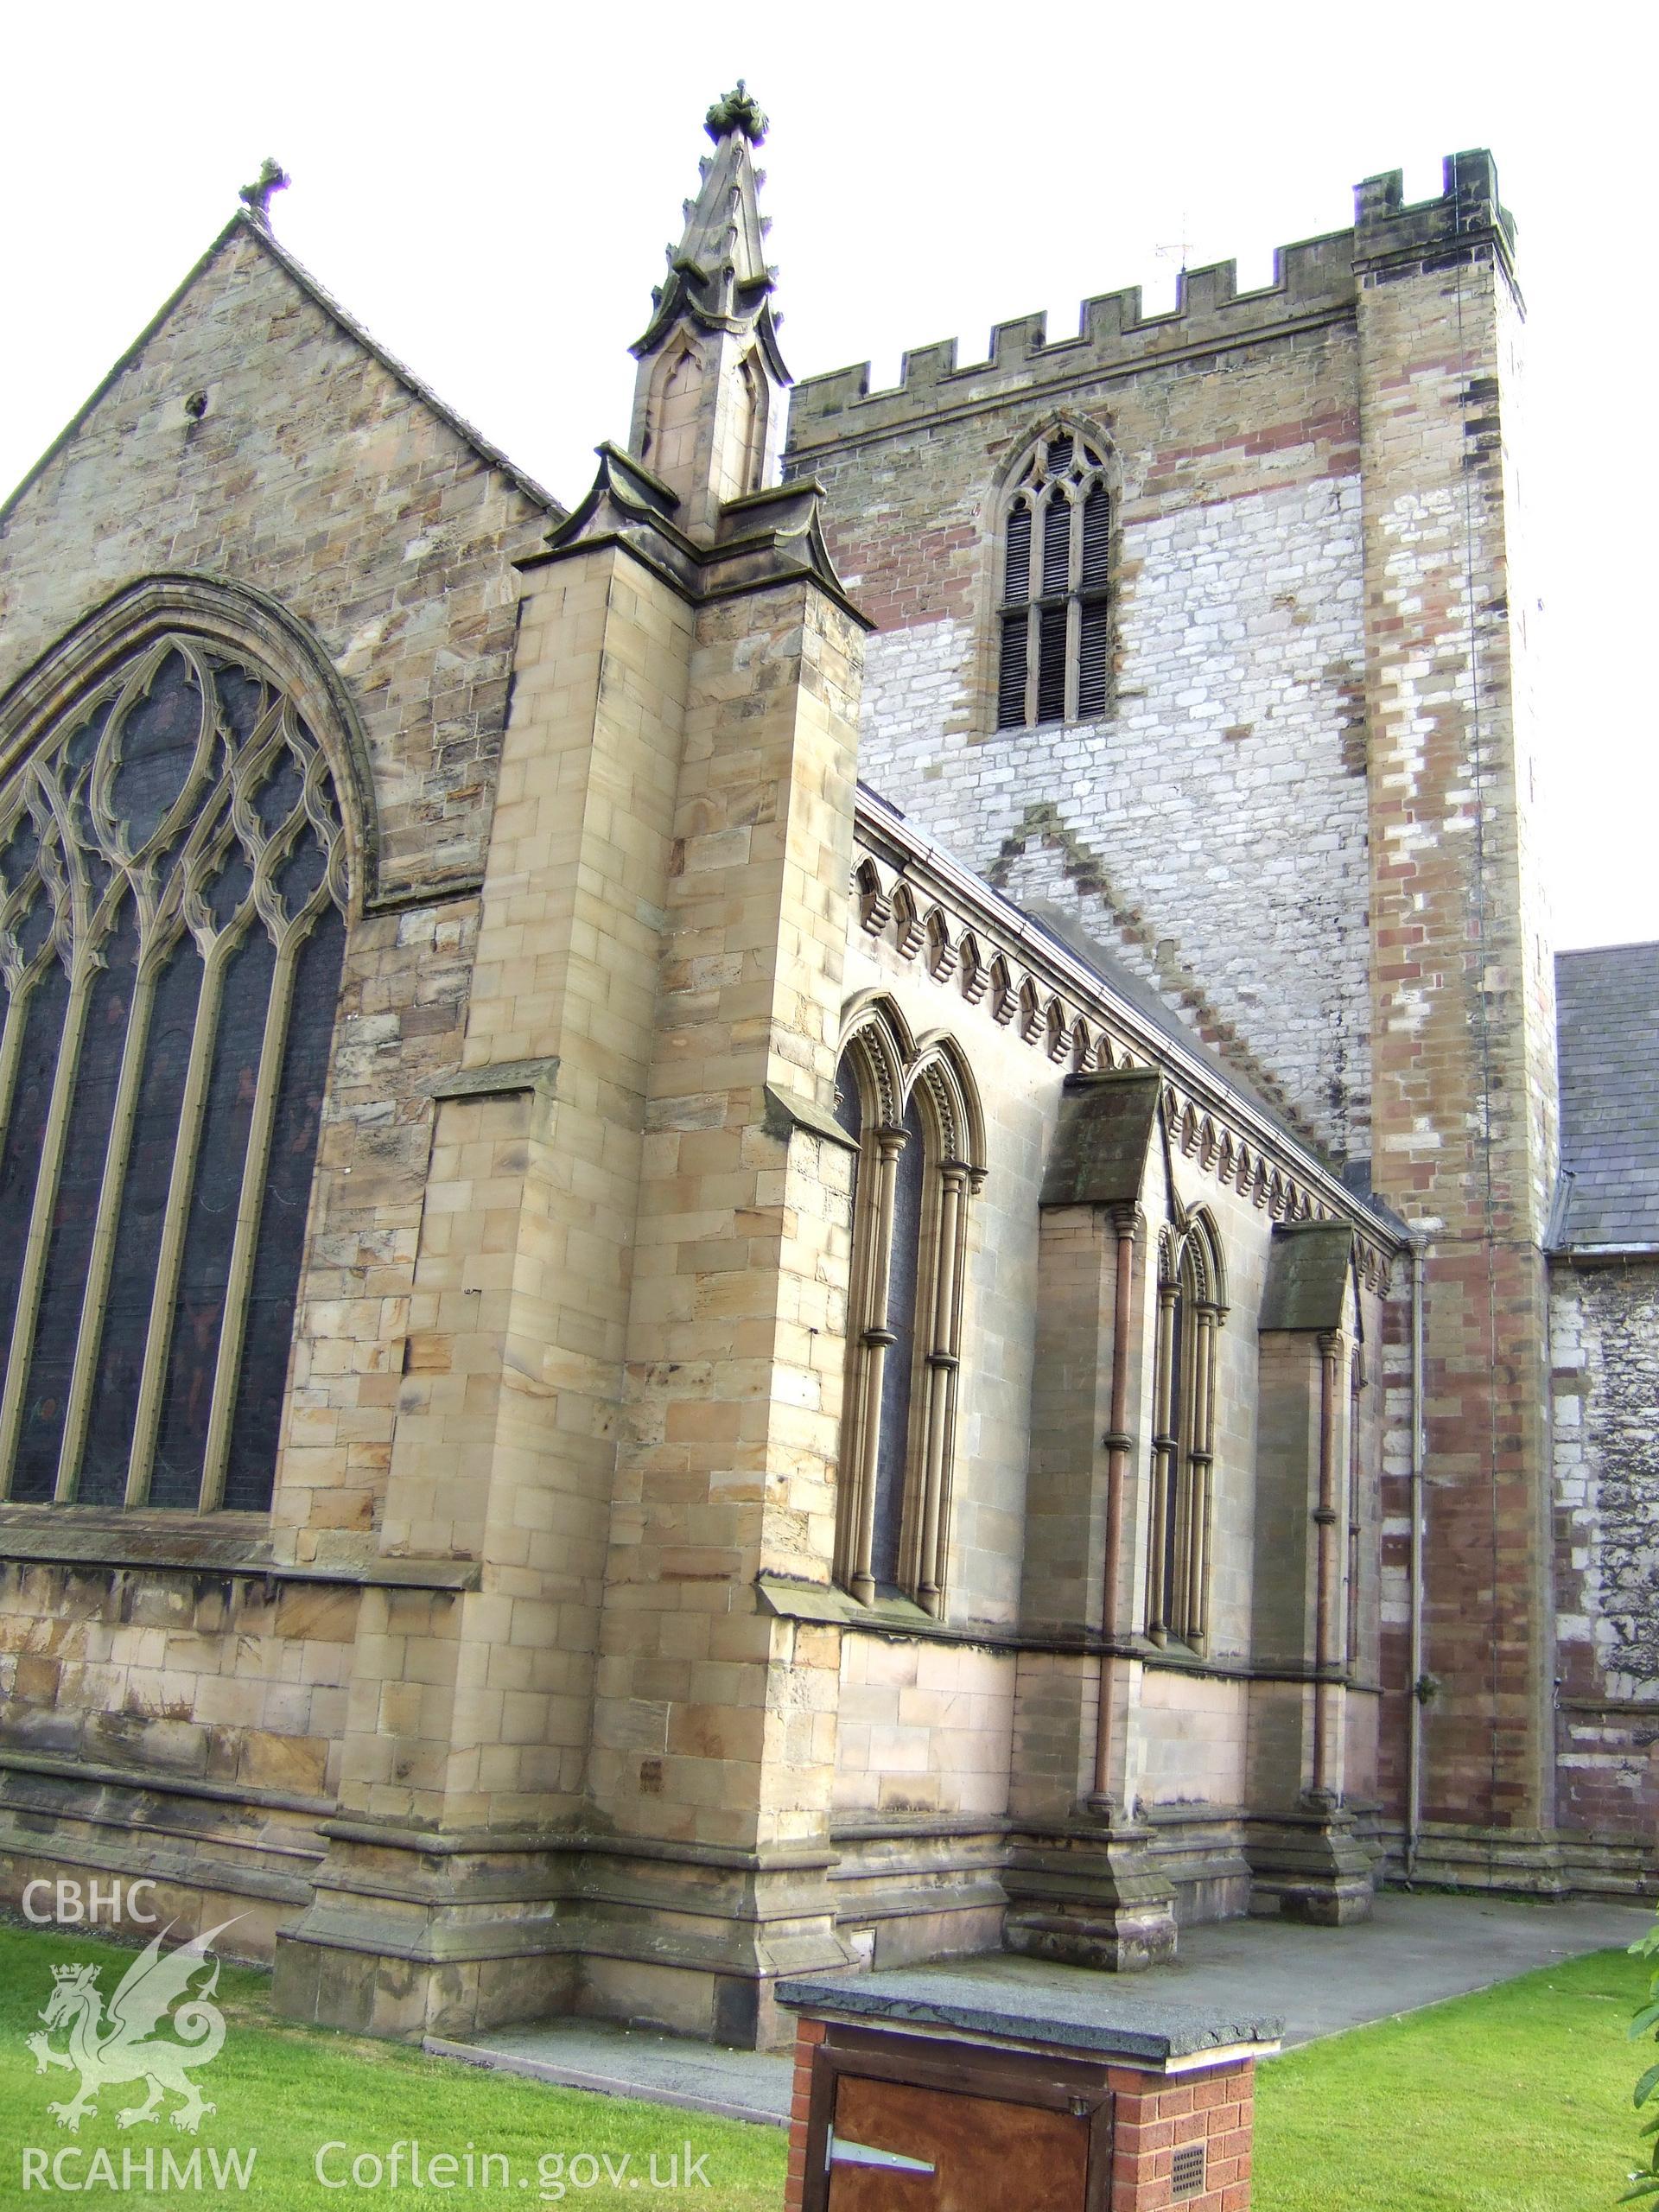 North-east face of the central tower and north-west side of chancel from the north-east.